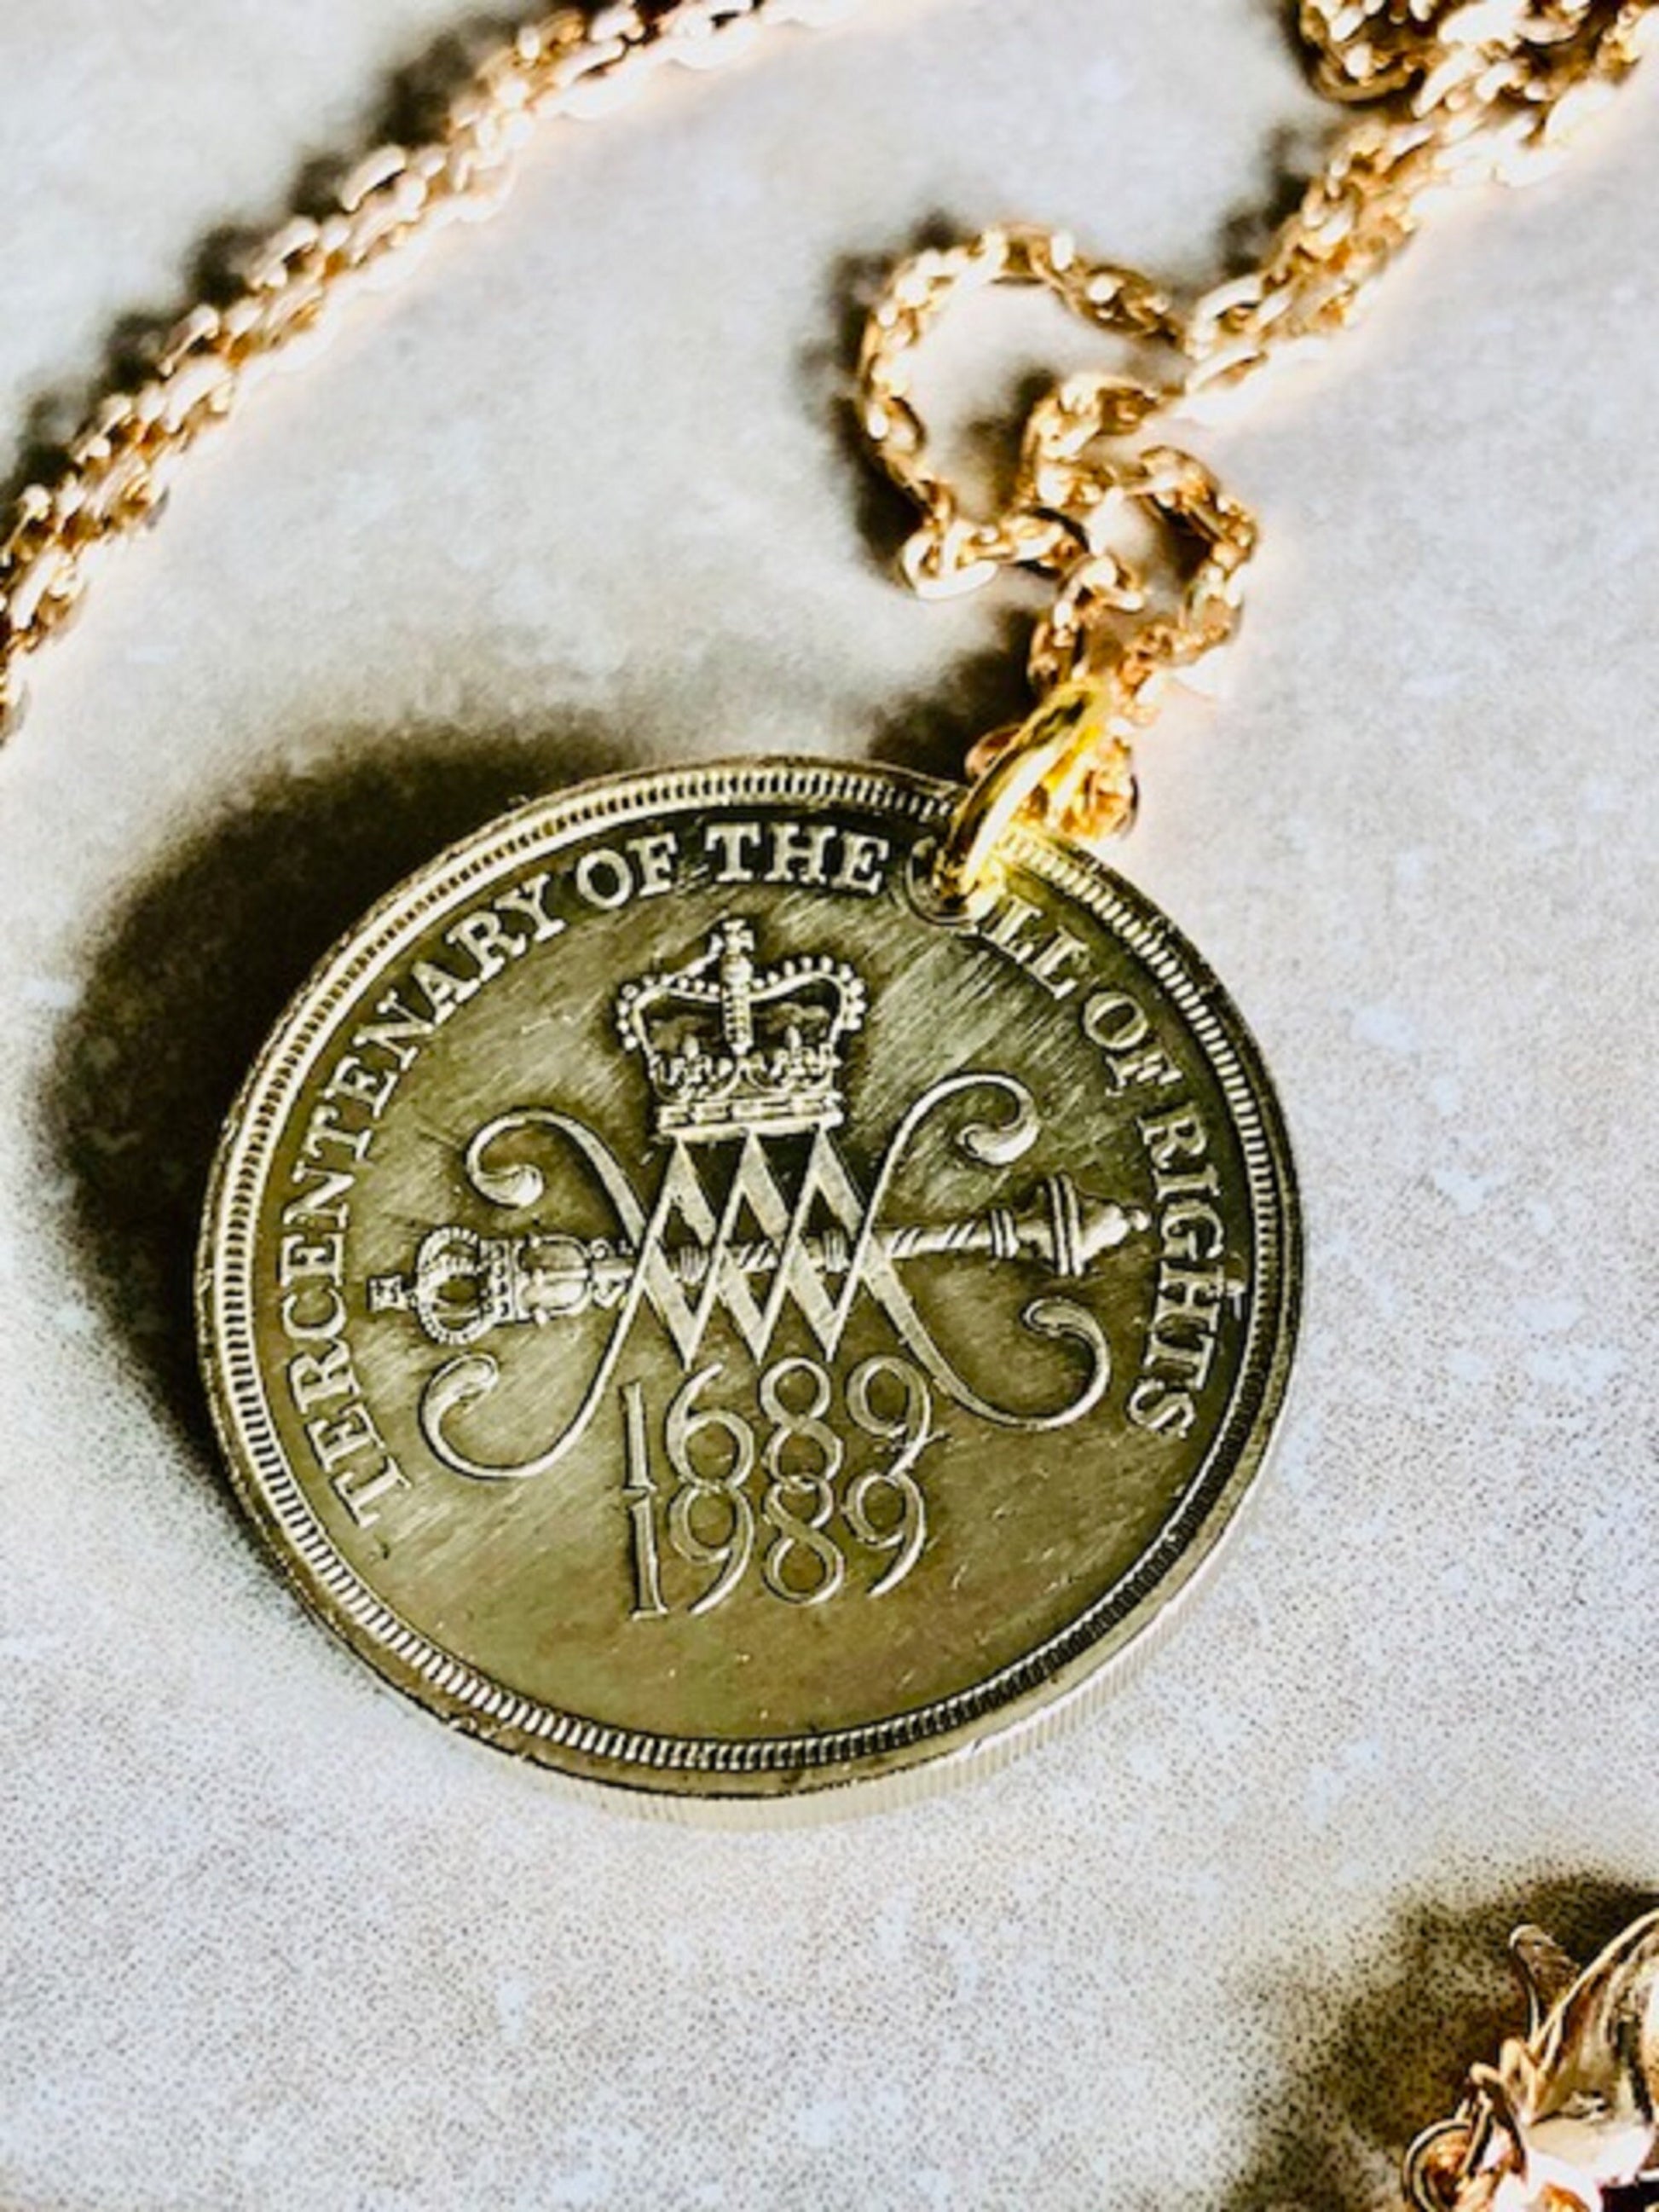 British Bill Of Rights 2 Pound 1989 Coin United Kingdom Queen Elizabeth Jewelry Personal Necklace Gift Friend Charm Him Her World Collector